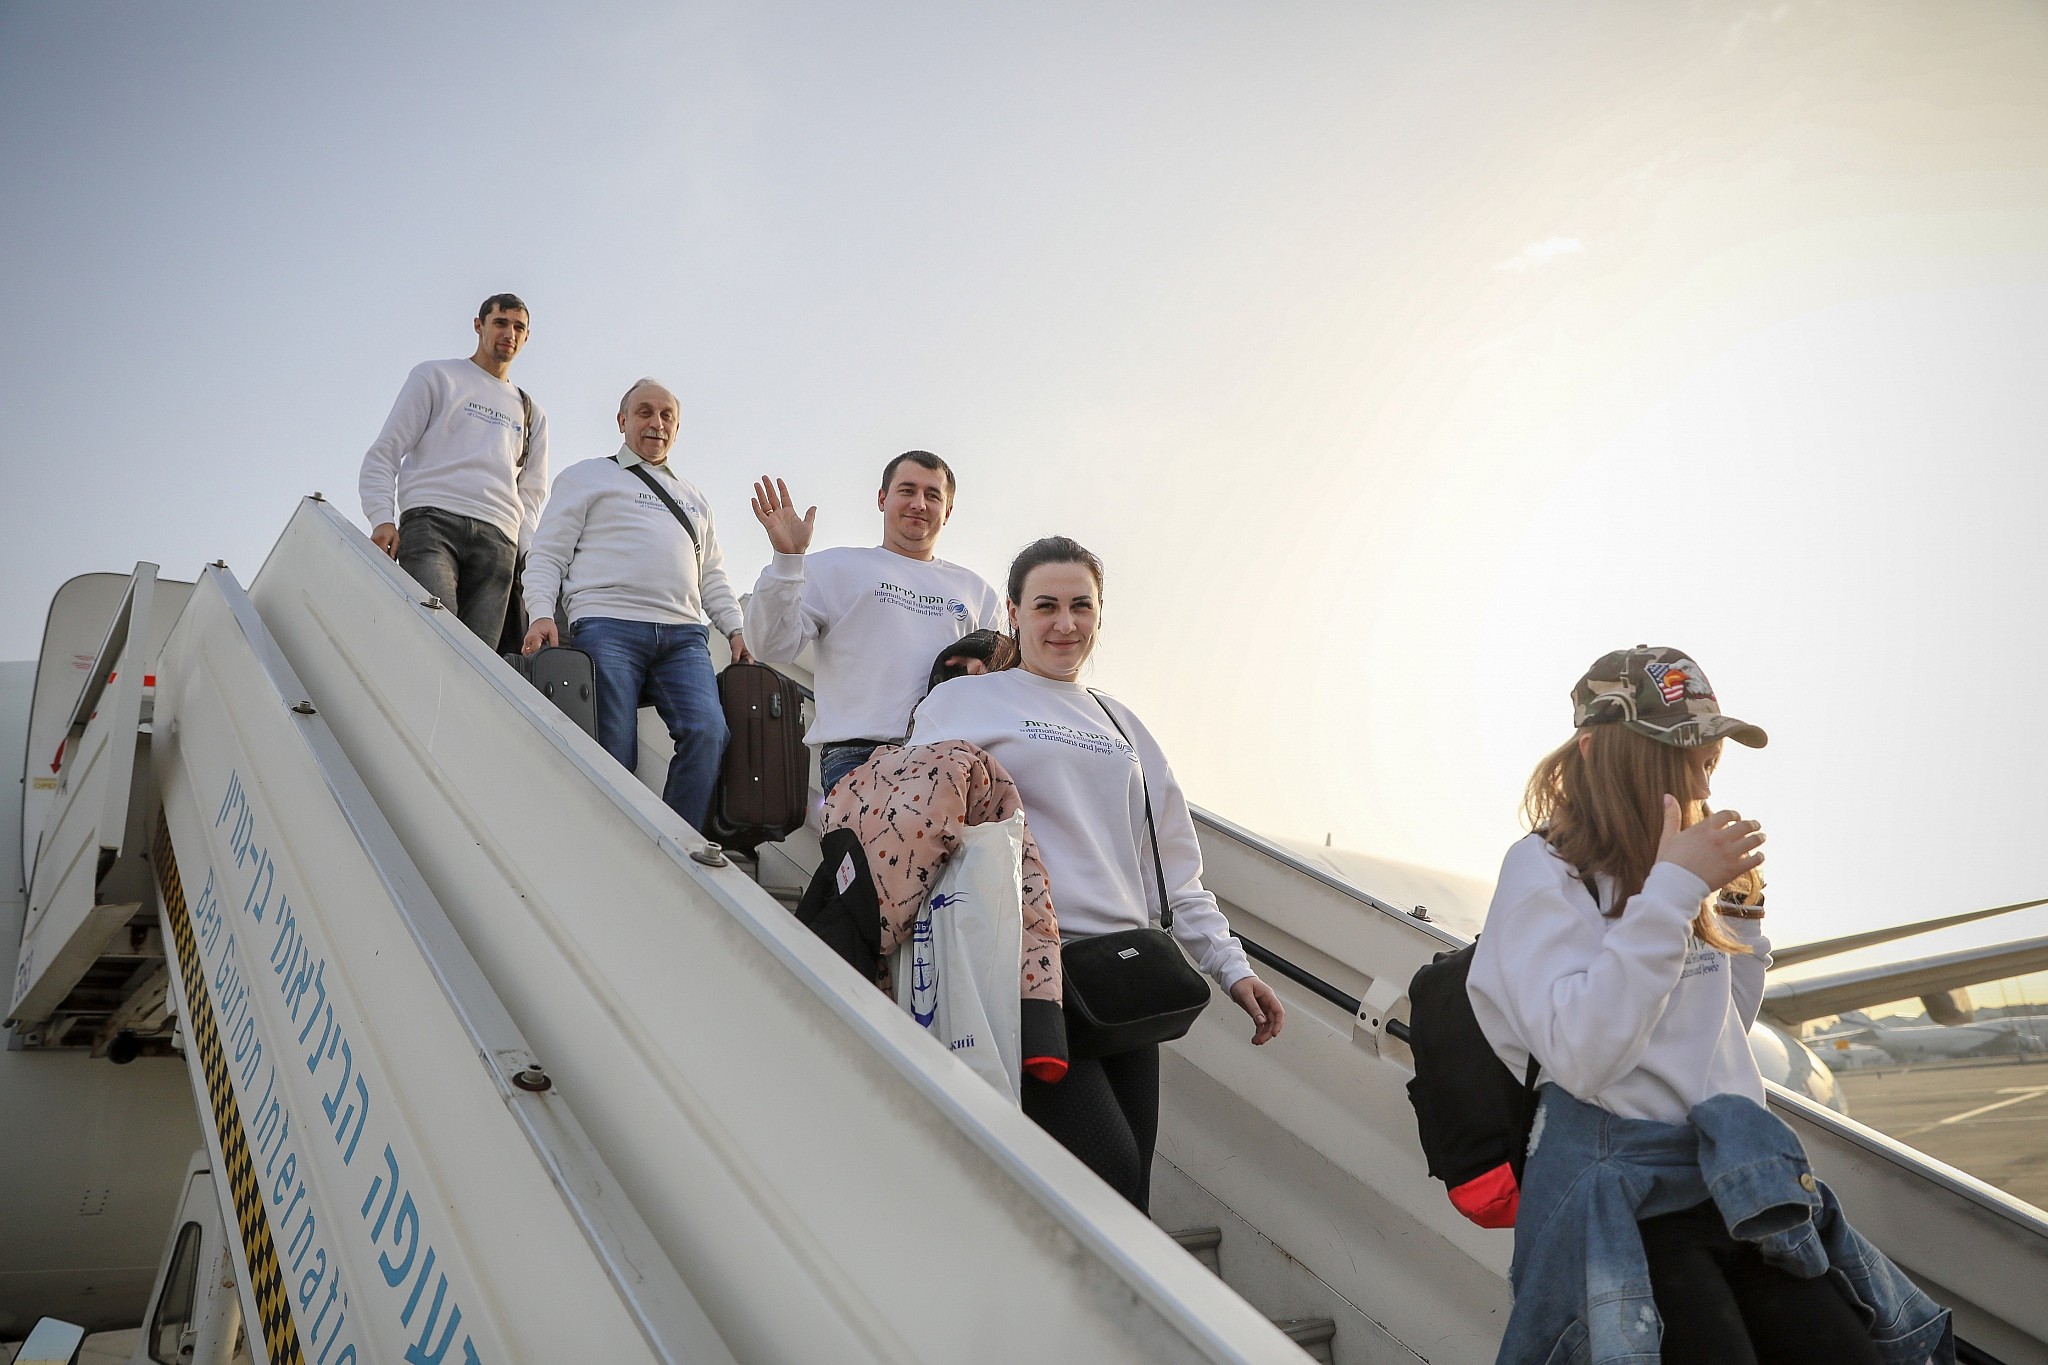 Operation Lifeshield - Israelis are praying for peace in Ukraine. Ukrainian  Jews fleeing the war who landed in Israel this week were enthusiastically  welcomed with song and dance by large crowds who